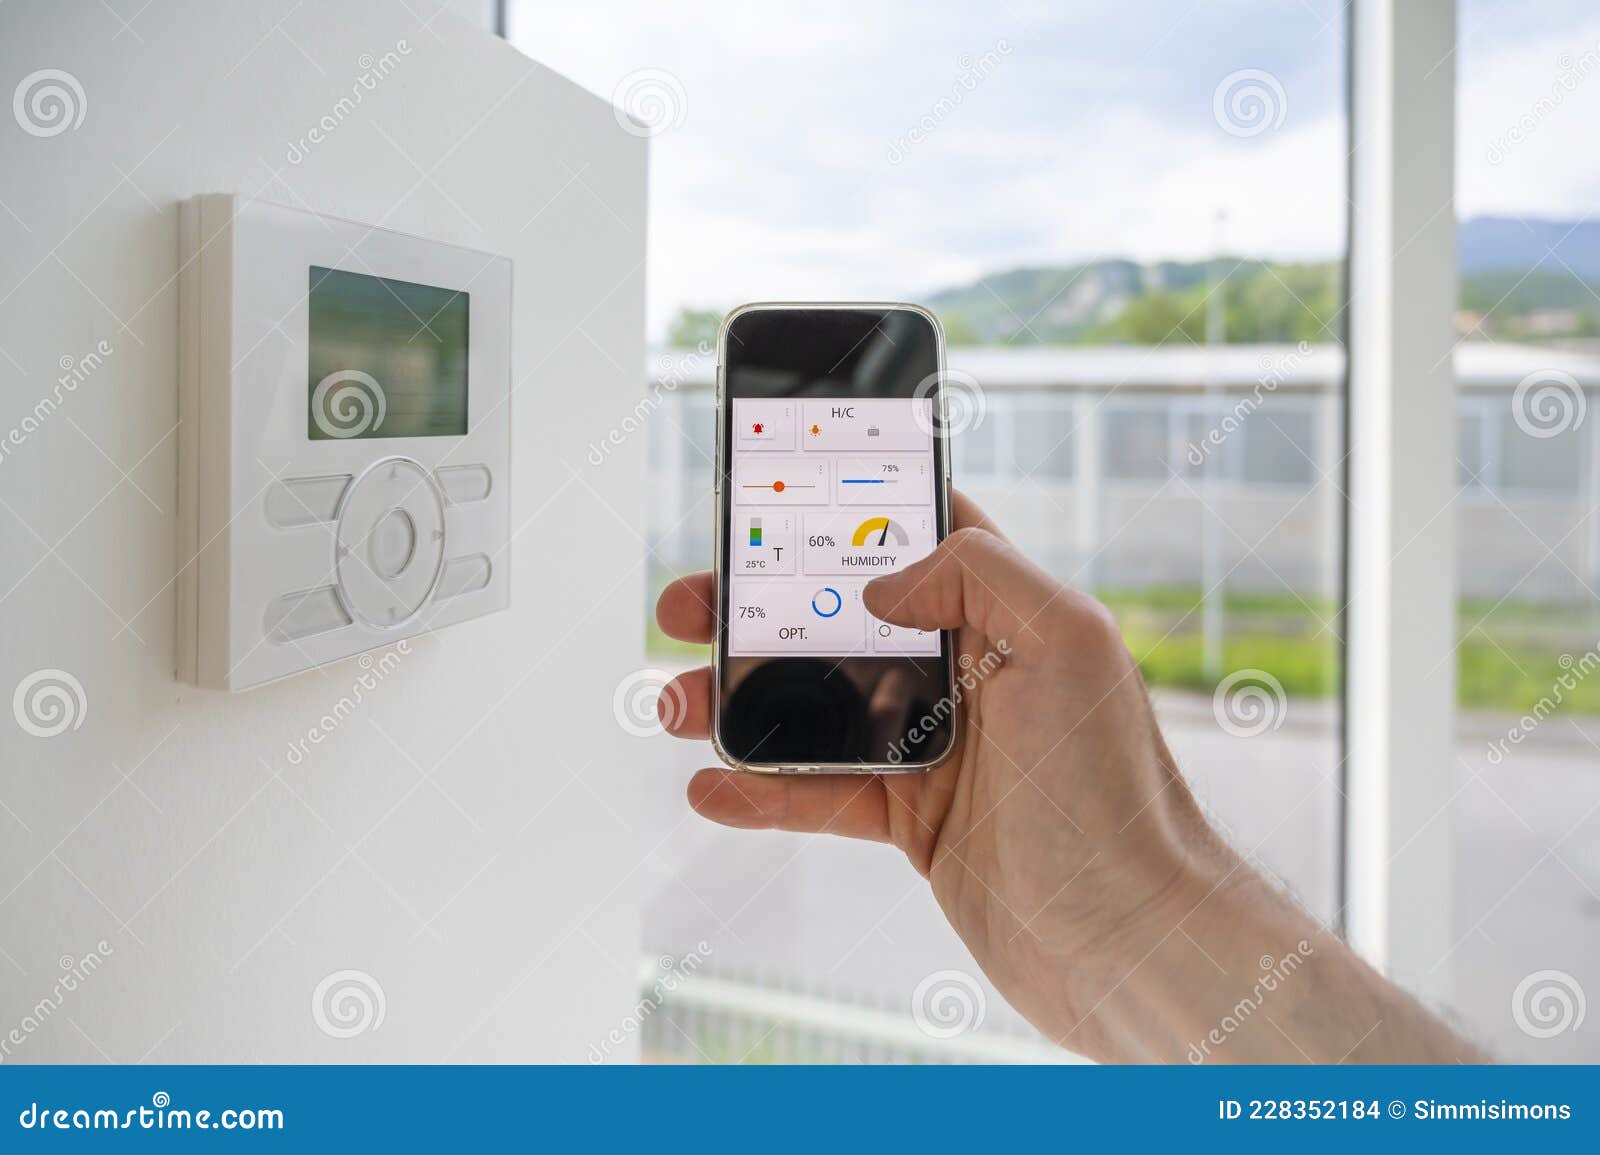 home automation with smart phone